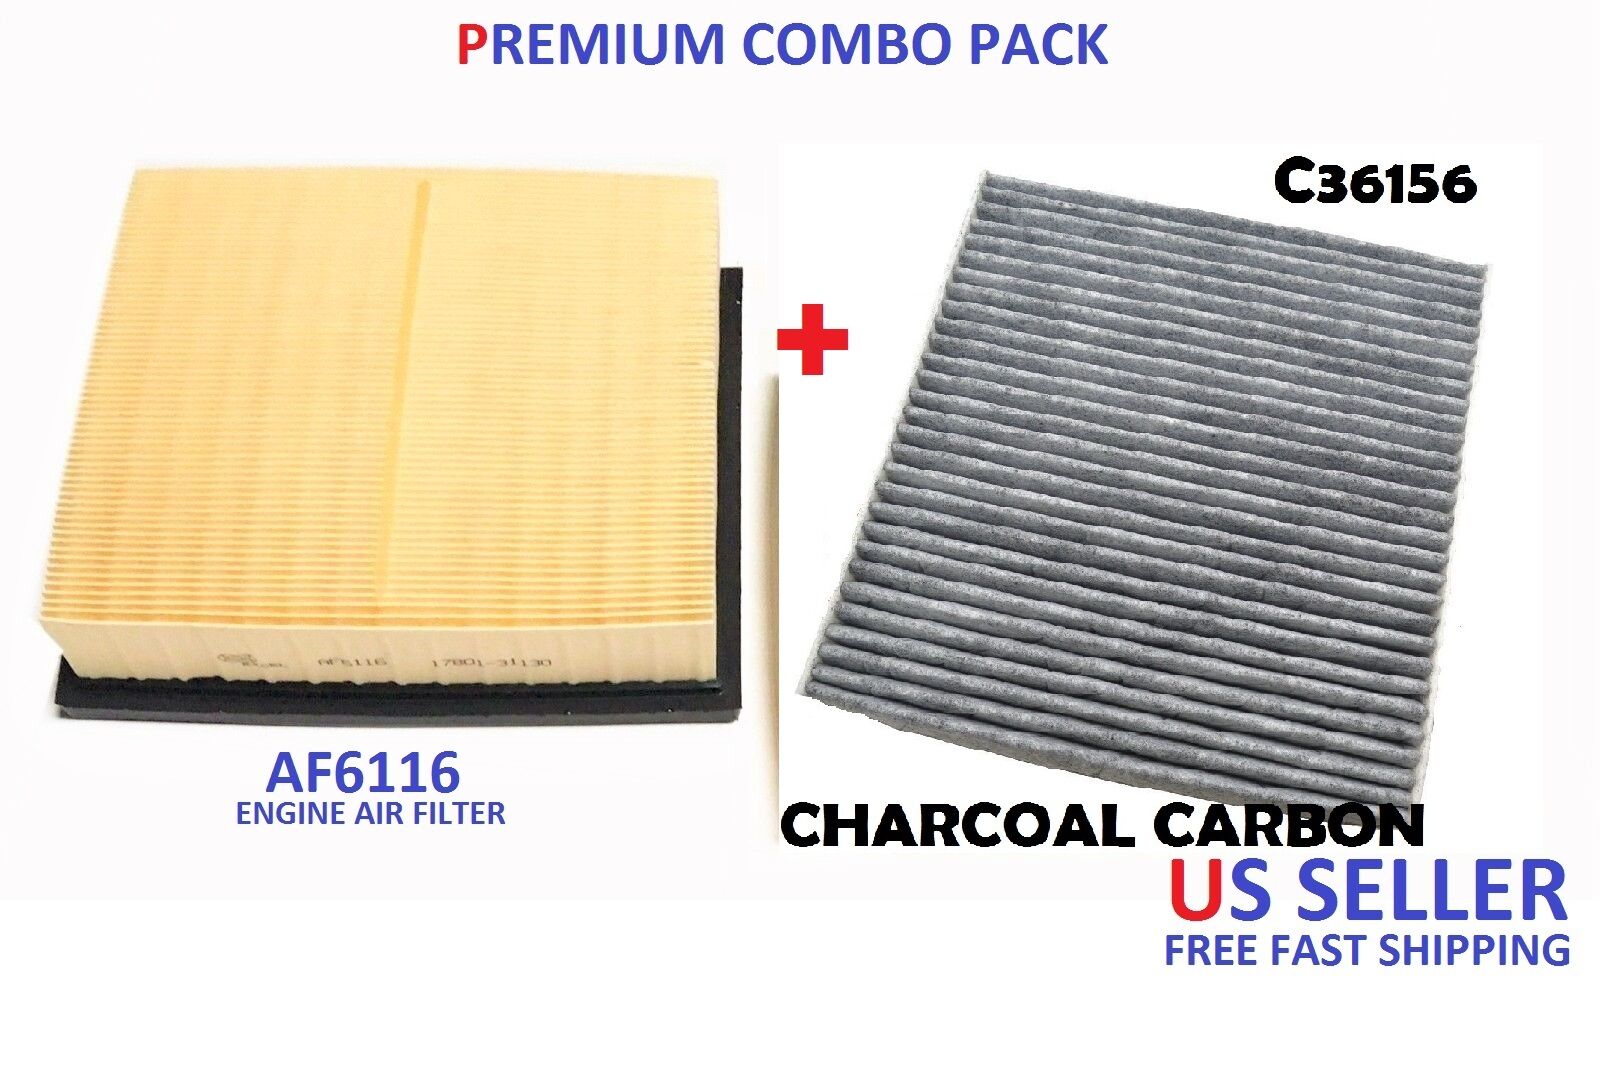 AF6116 C36156 ENGINE & CARBON CABIN AIR FILTER COMBO For DURANGO GRAND CHEROKEE